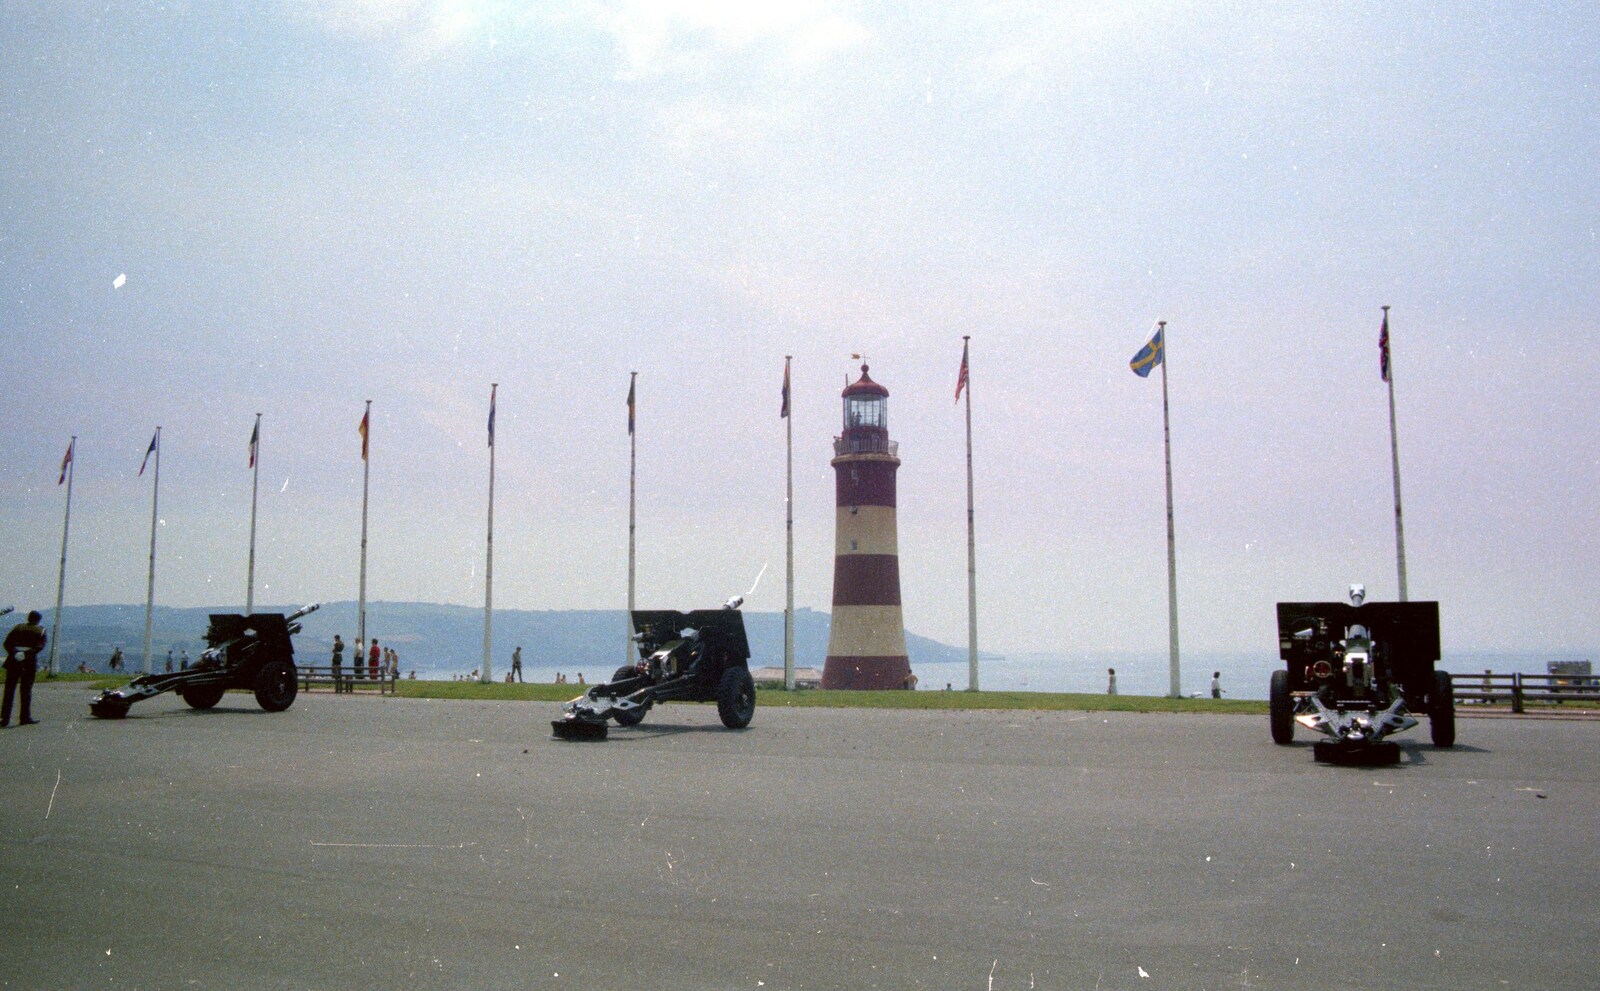 Three field guns on the Hoe from Uni: Twenty One Guns and Footie on the Beach, Plymouth Hoe and Salcombe, Devon - 15th June 1986